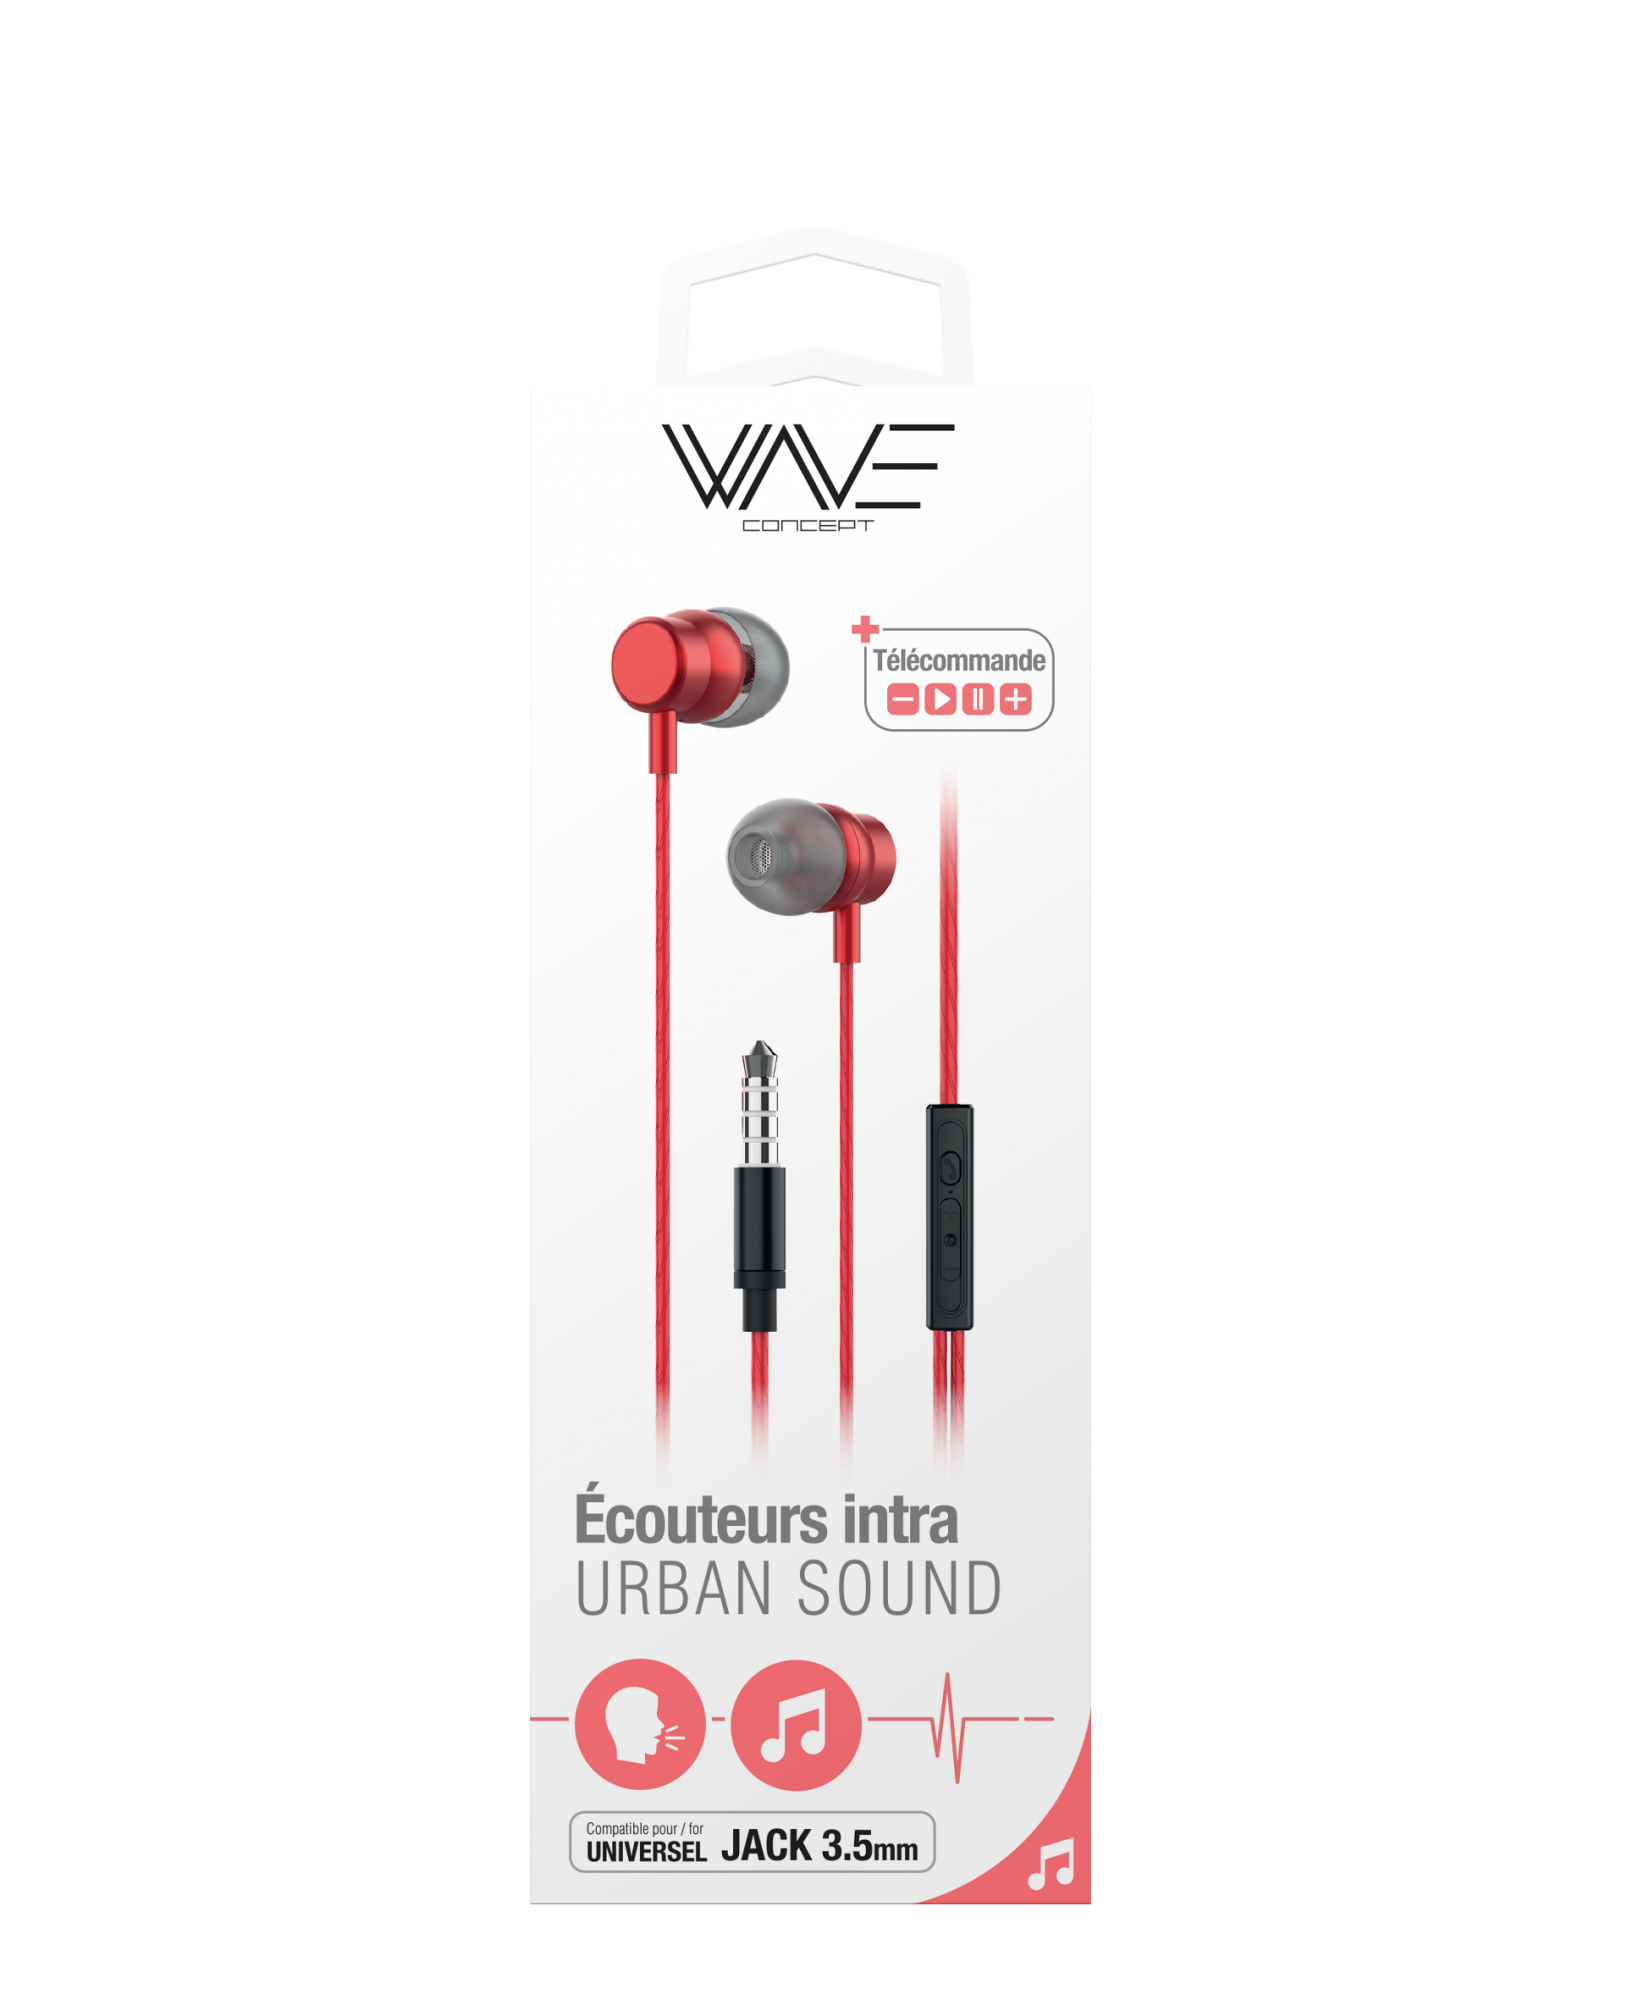 https://www.wave-concept.com/upload/image/ecouteurs-filaires-intra-auriculaire-gamme-urban-sound-p-image-40516-grande.png